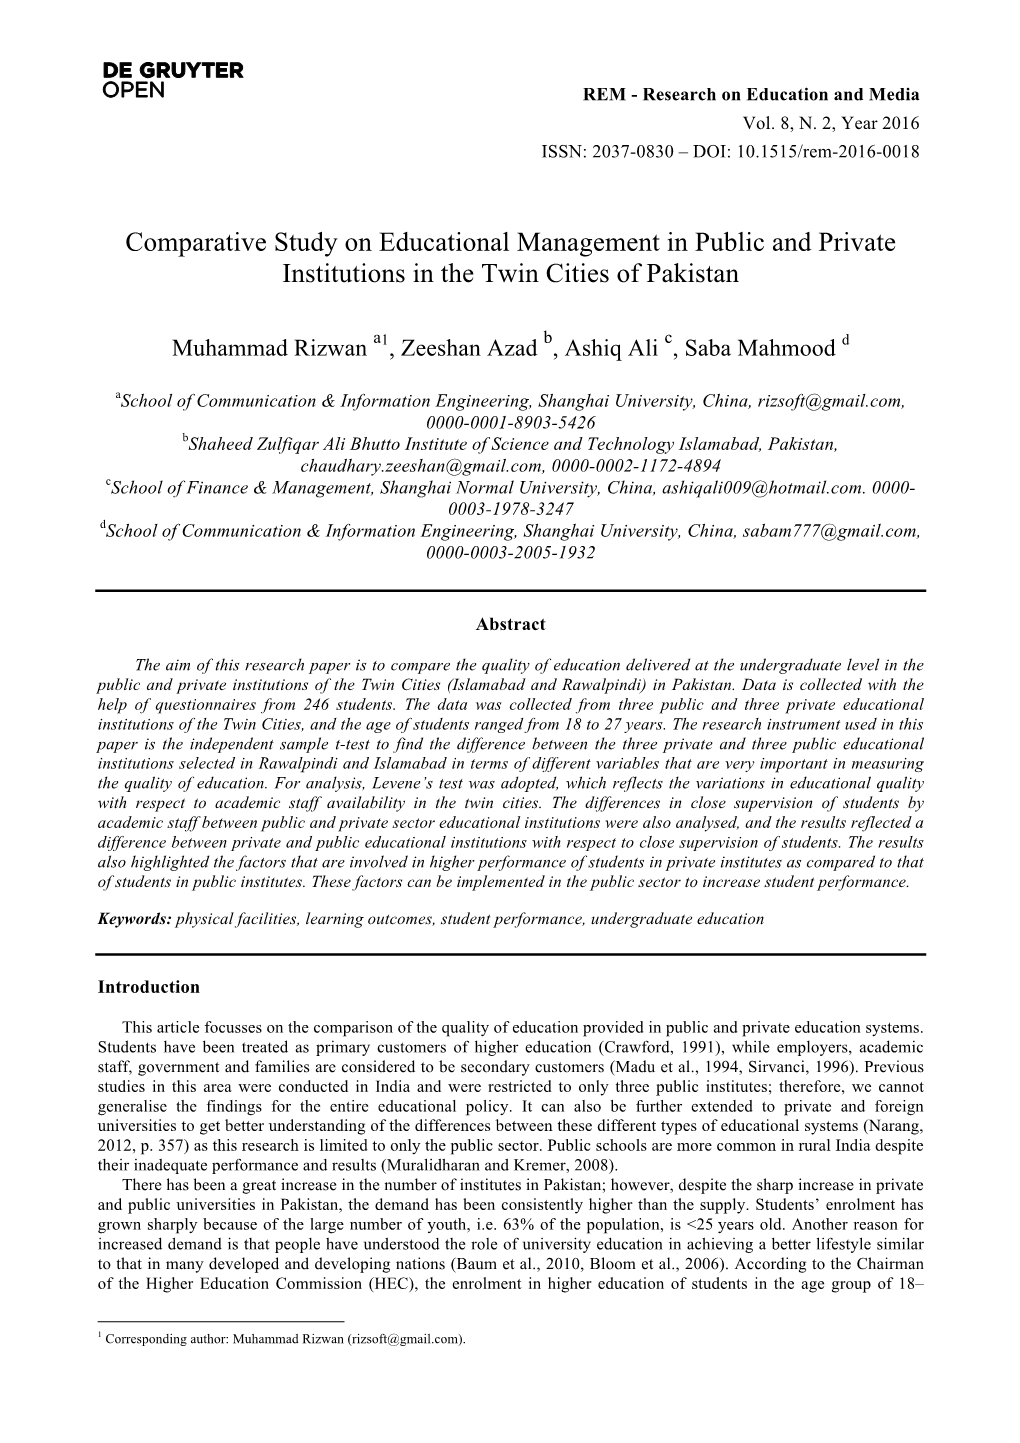 Comparative Study on Educational Management in Public and Private Institutions in the Twin Cities of Pakistan